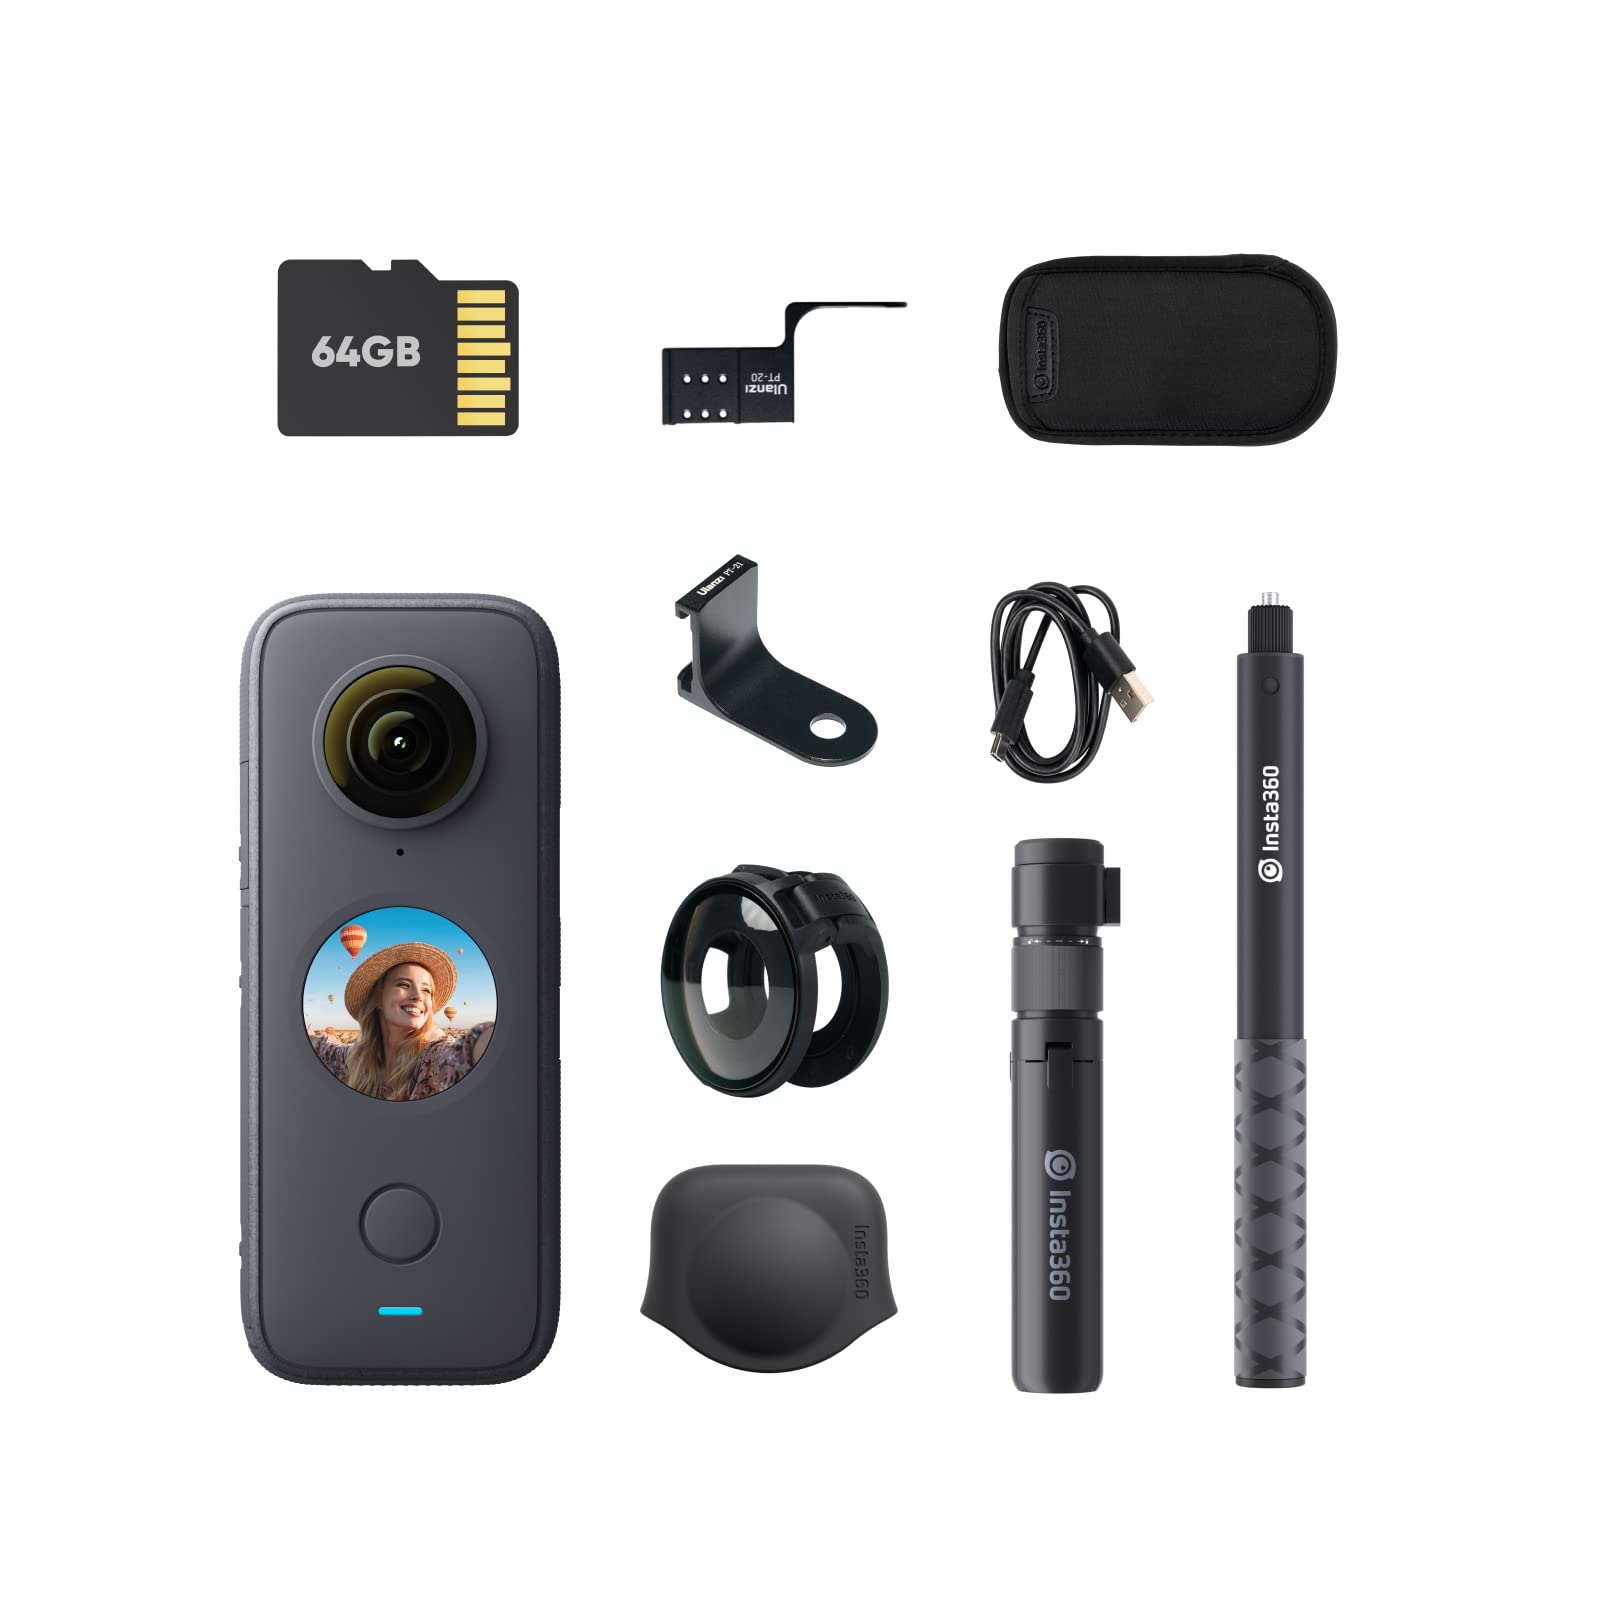 Insta360 ONEX2 Creator Kit - 360 Degree Waterproof Action Camera, 5.7K 360, Stabilization, Touch Screen, AI Editing, Live Streaming, Webcam, Voice Control